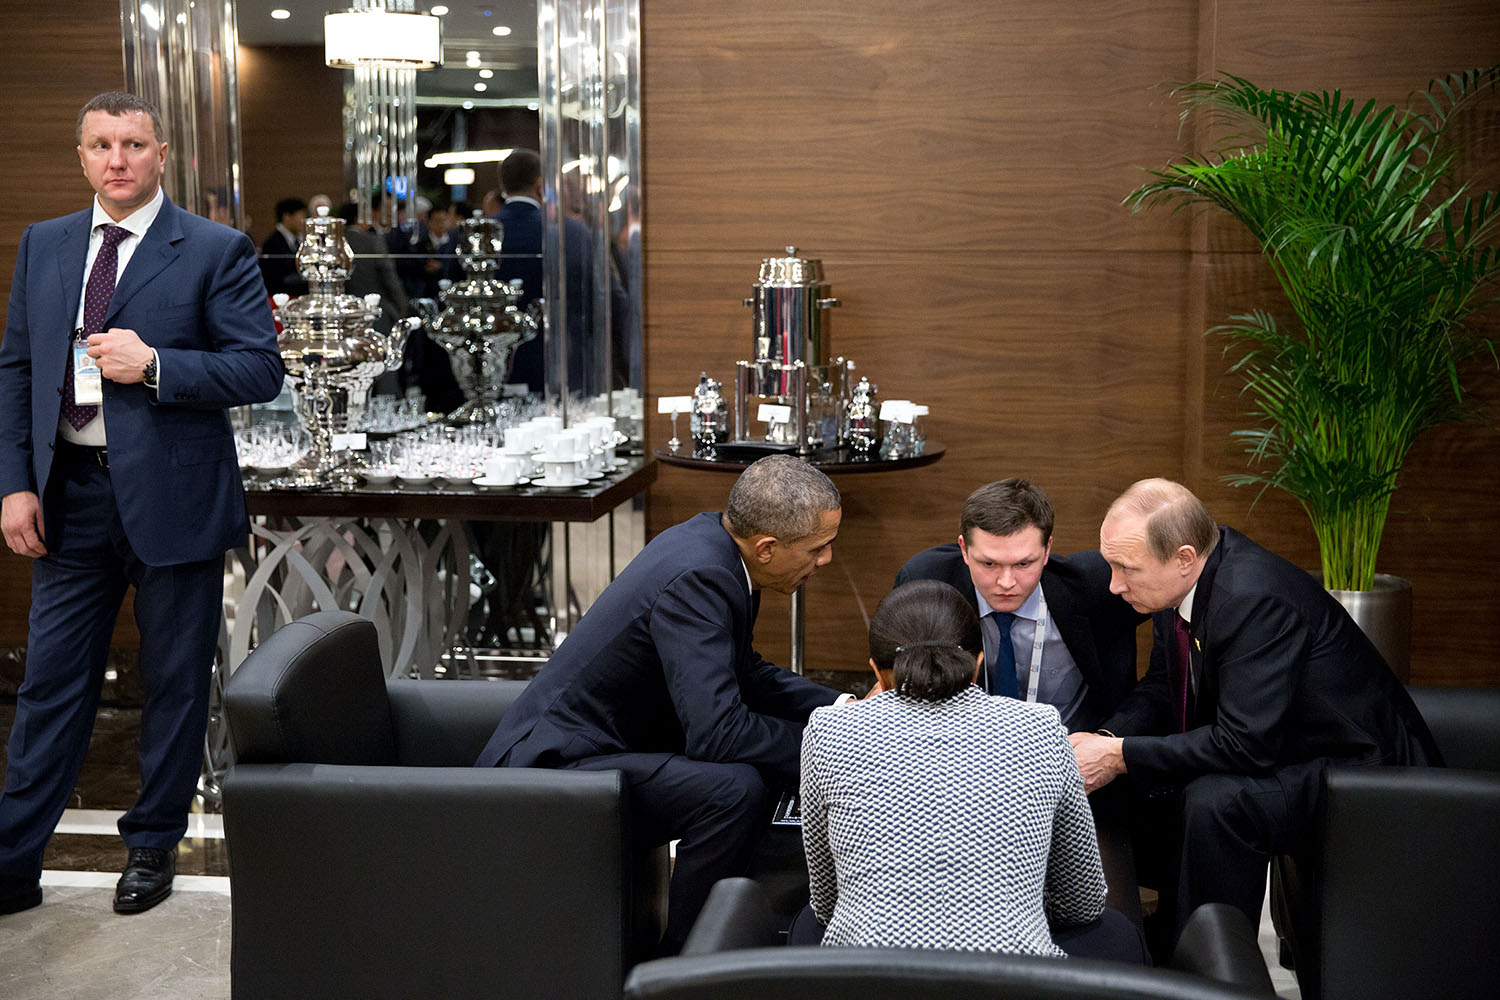 Nov. 15, 2015. With a Russian security guard at left, the President meets with President Putin of Russia on the sidelines of the G20 Summit in Antalya, Turkey. National Security Advisor Susan E. Rice and a Russian interpreter sit alongside the two leaders.